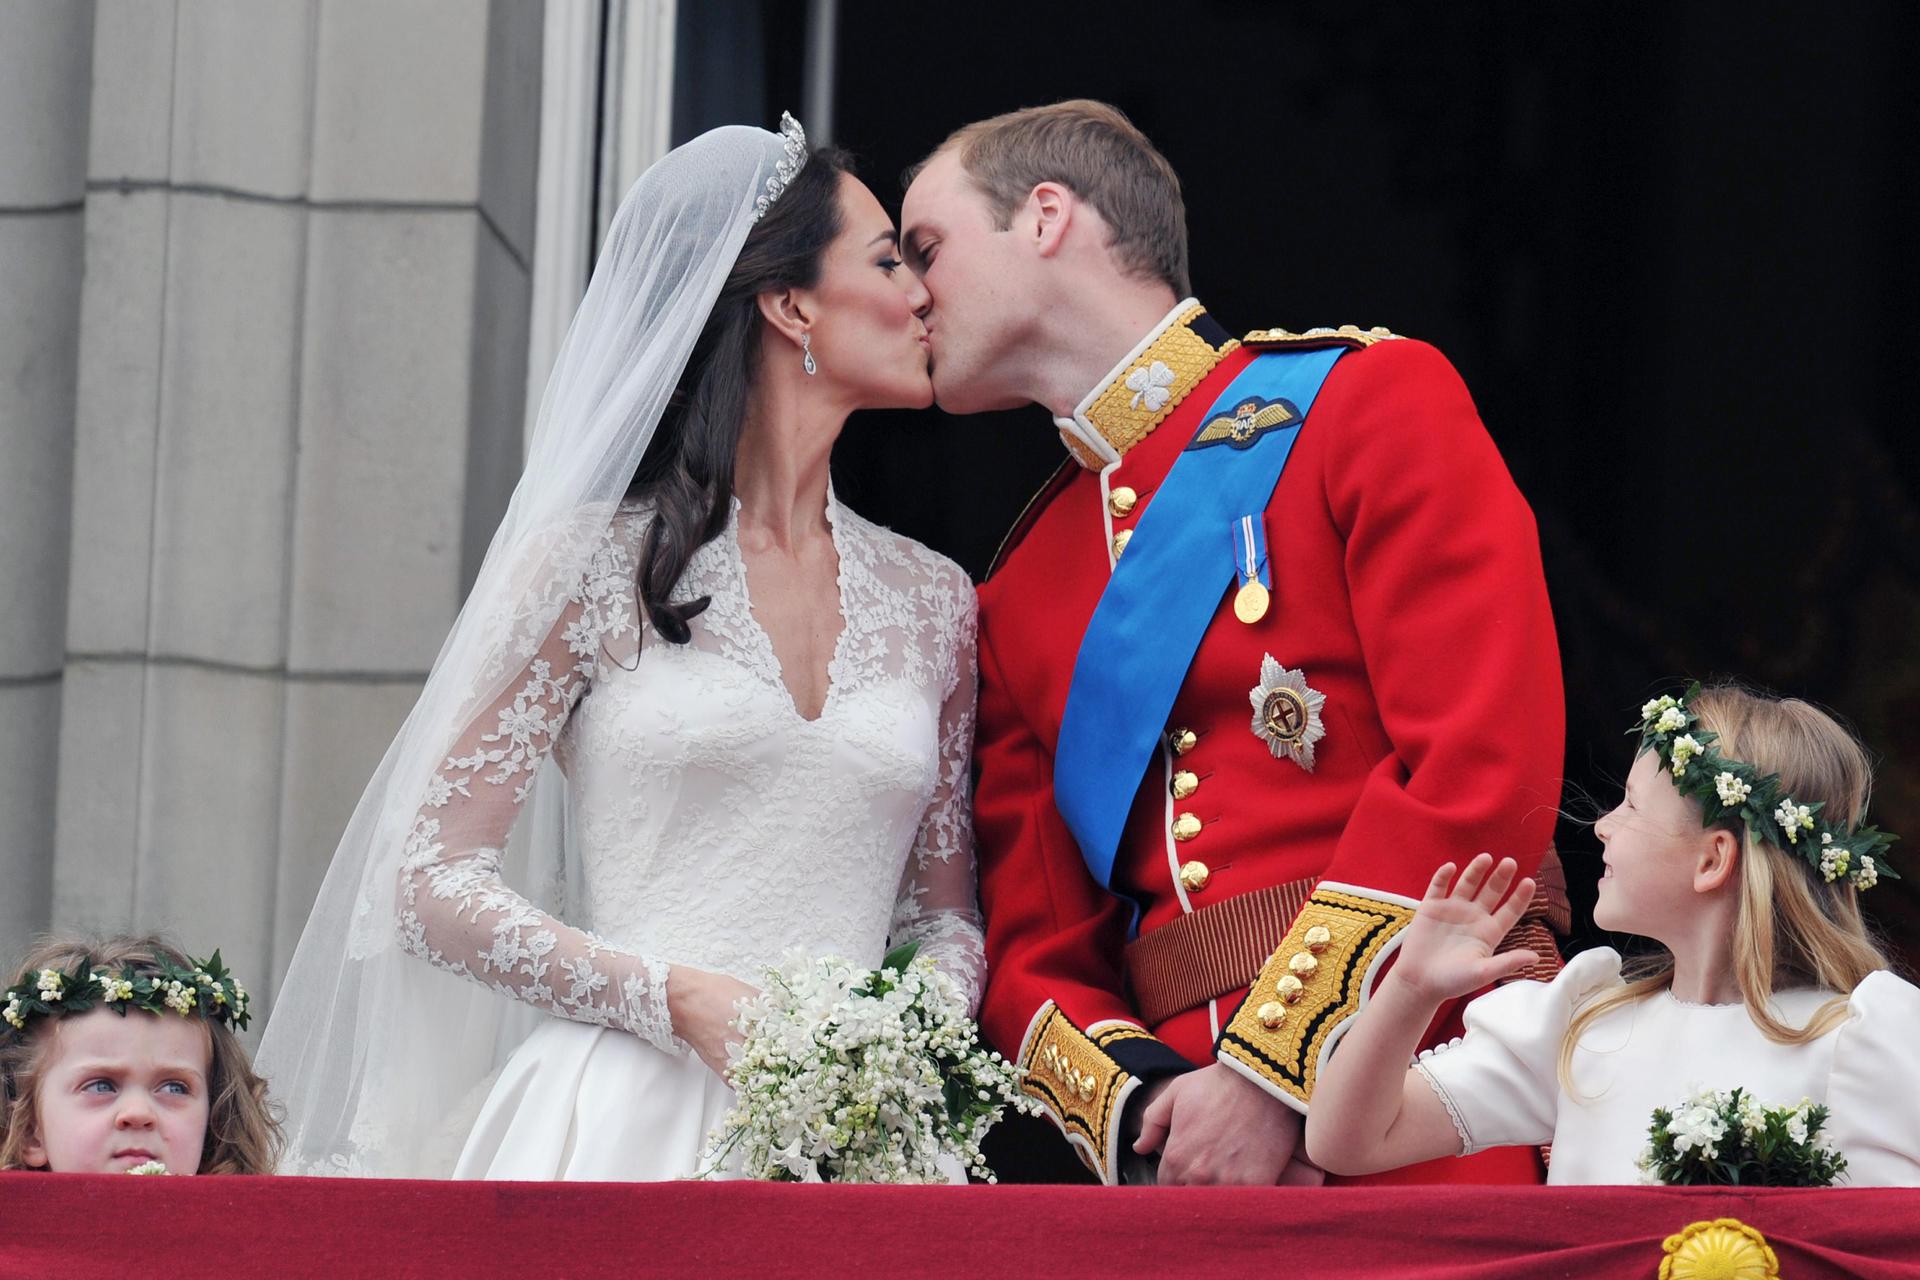 Prince William and Princess Kate kiss on the balcony of Buckingham Palace at their wedding in 2011.